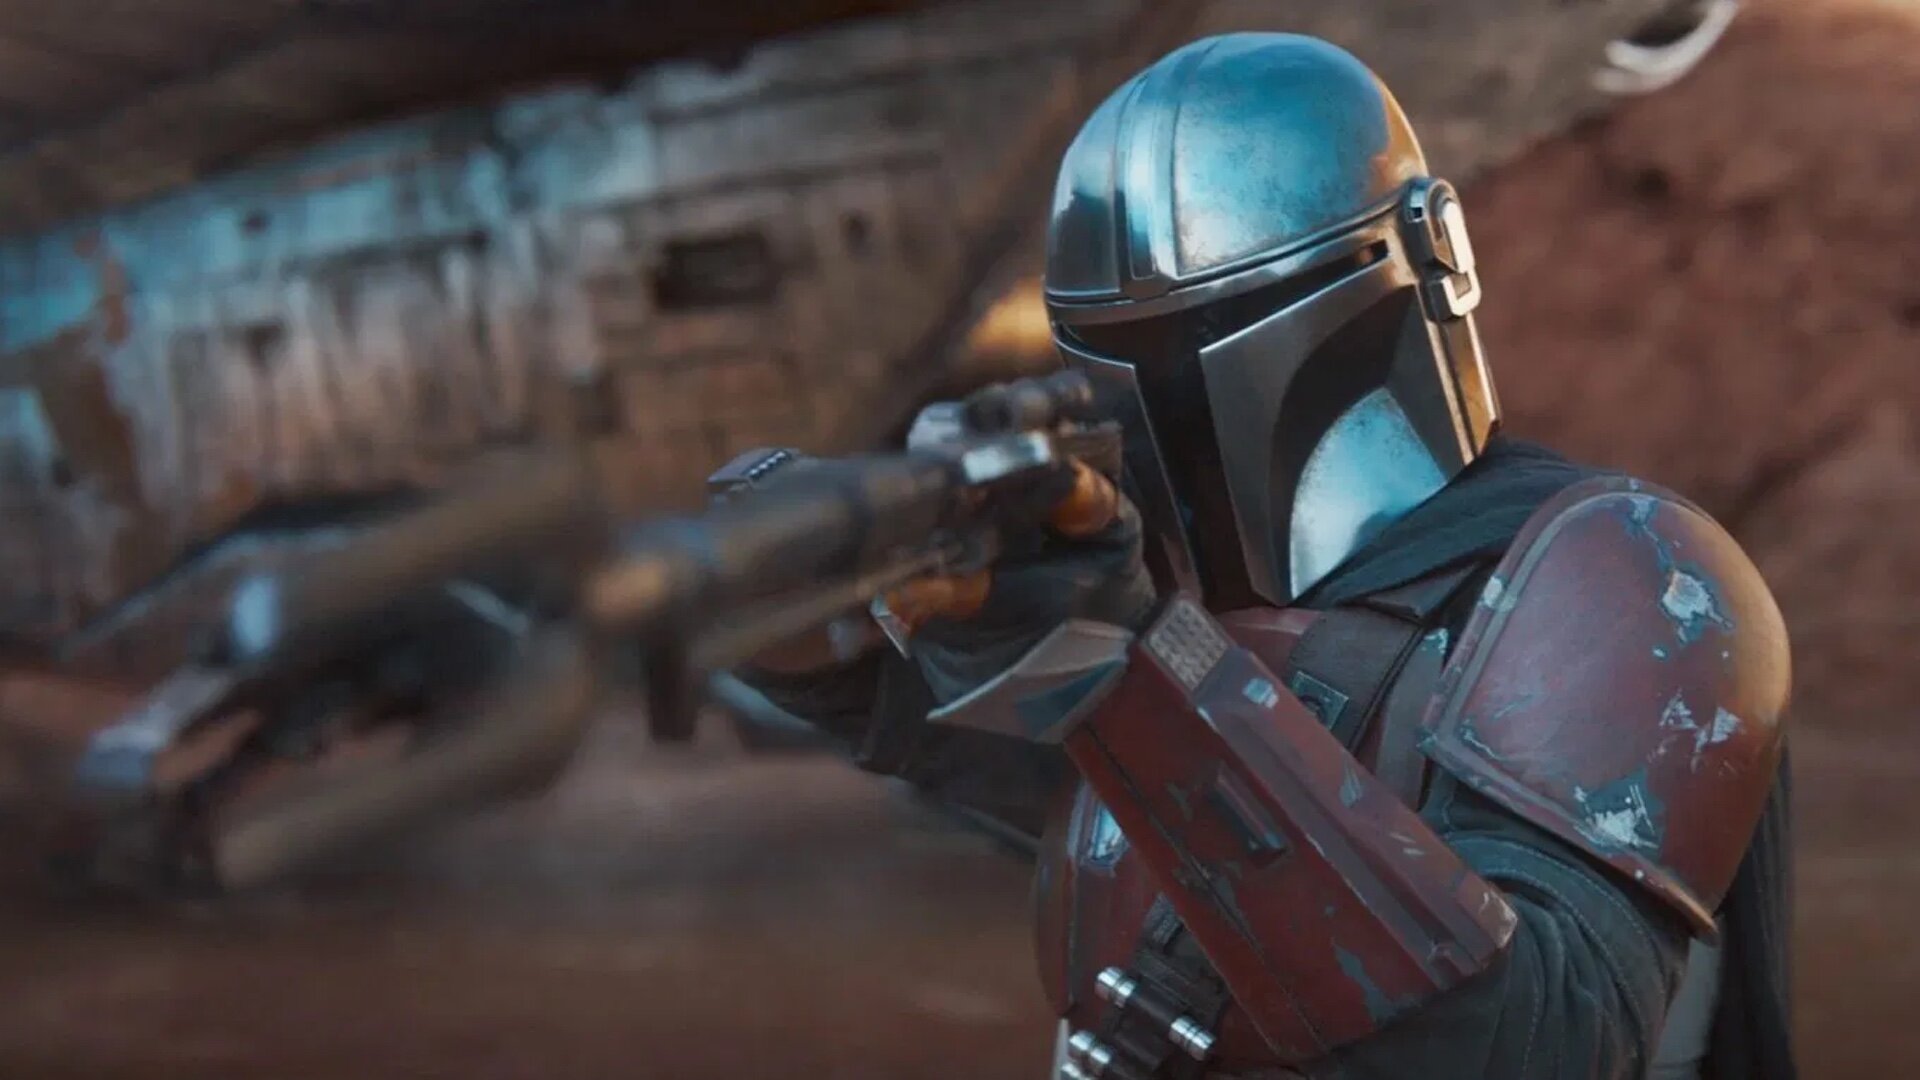 We have stars to fight for us!-Mandalorian